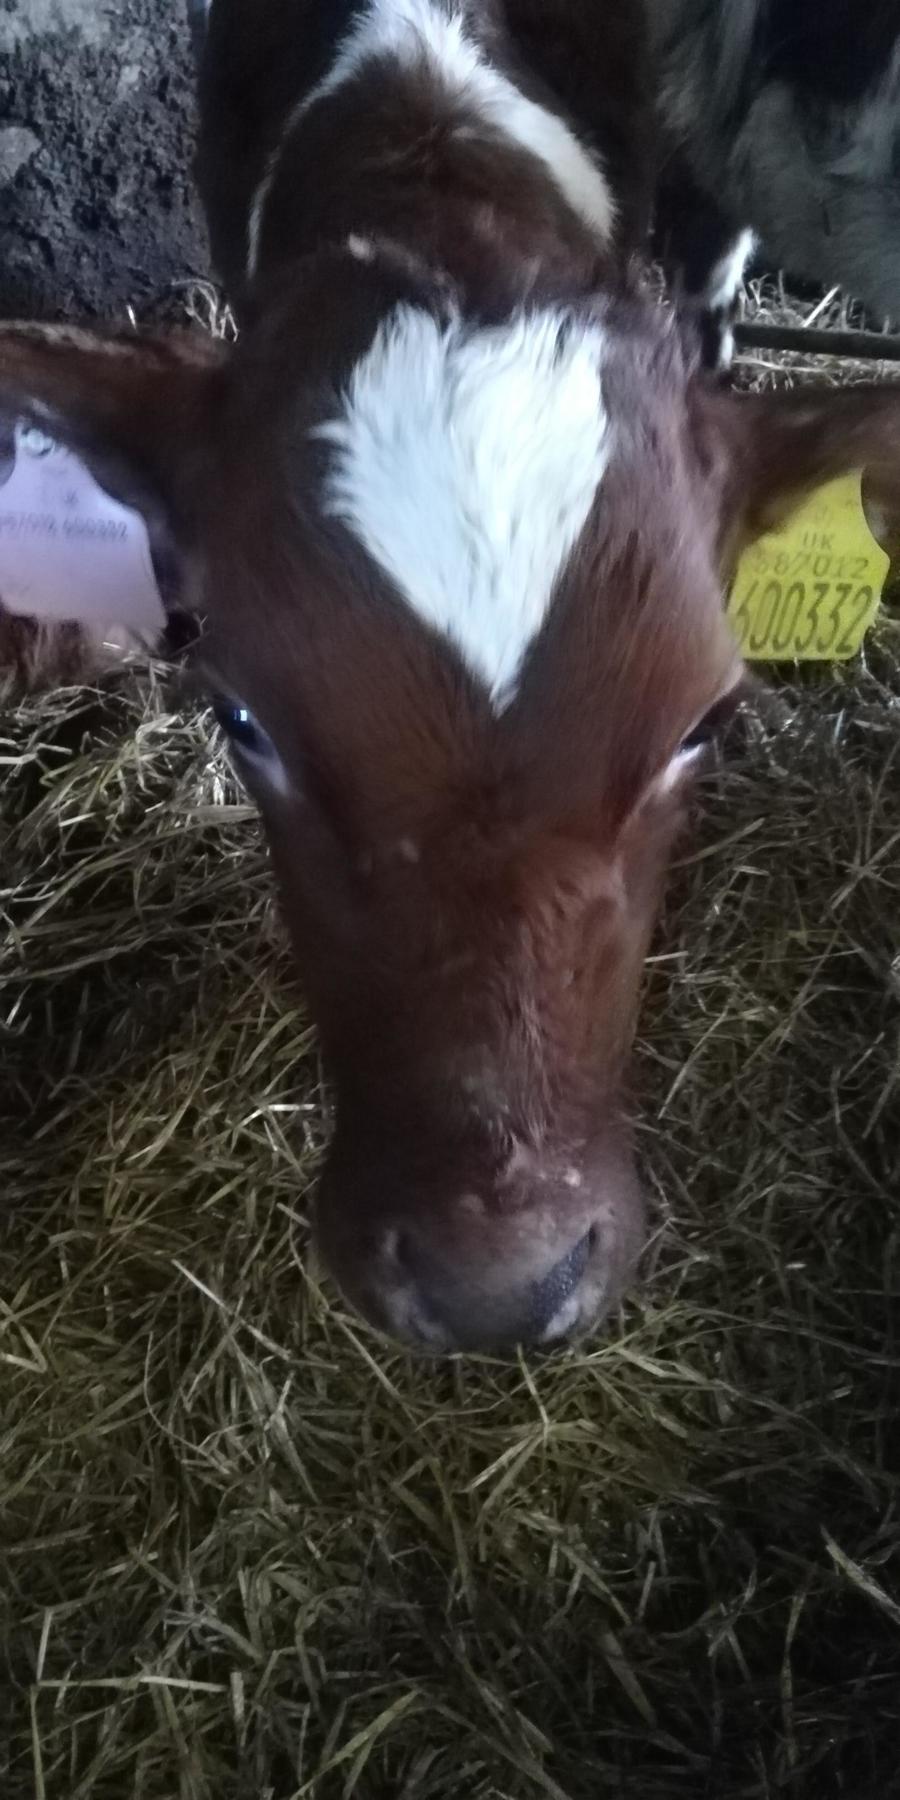 February: A new calf with a heart shaped marking on Valentine's day!